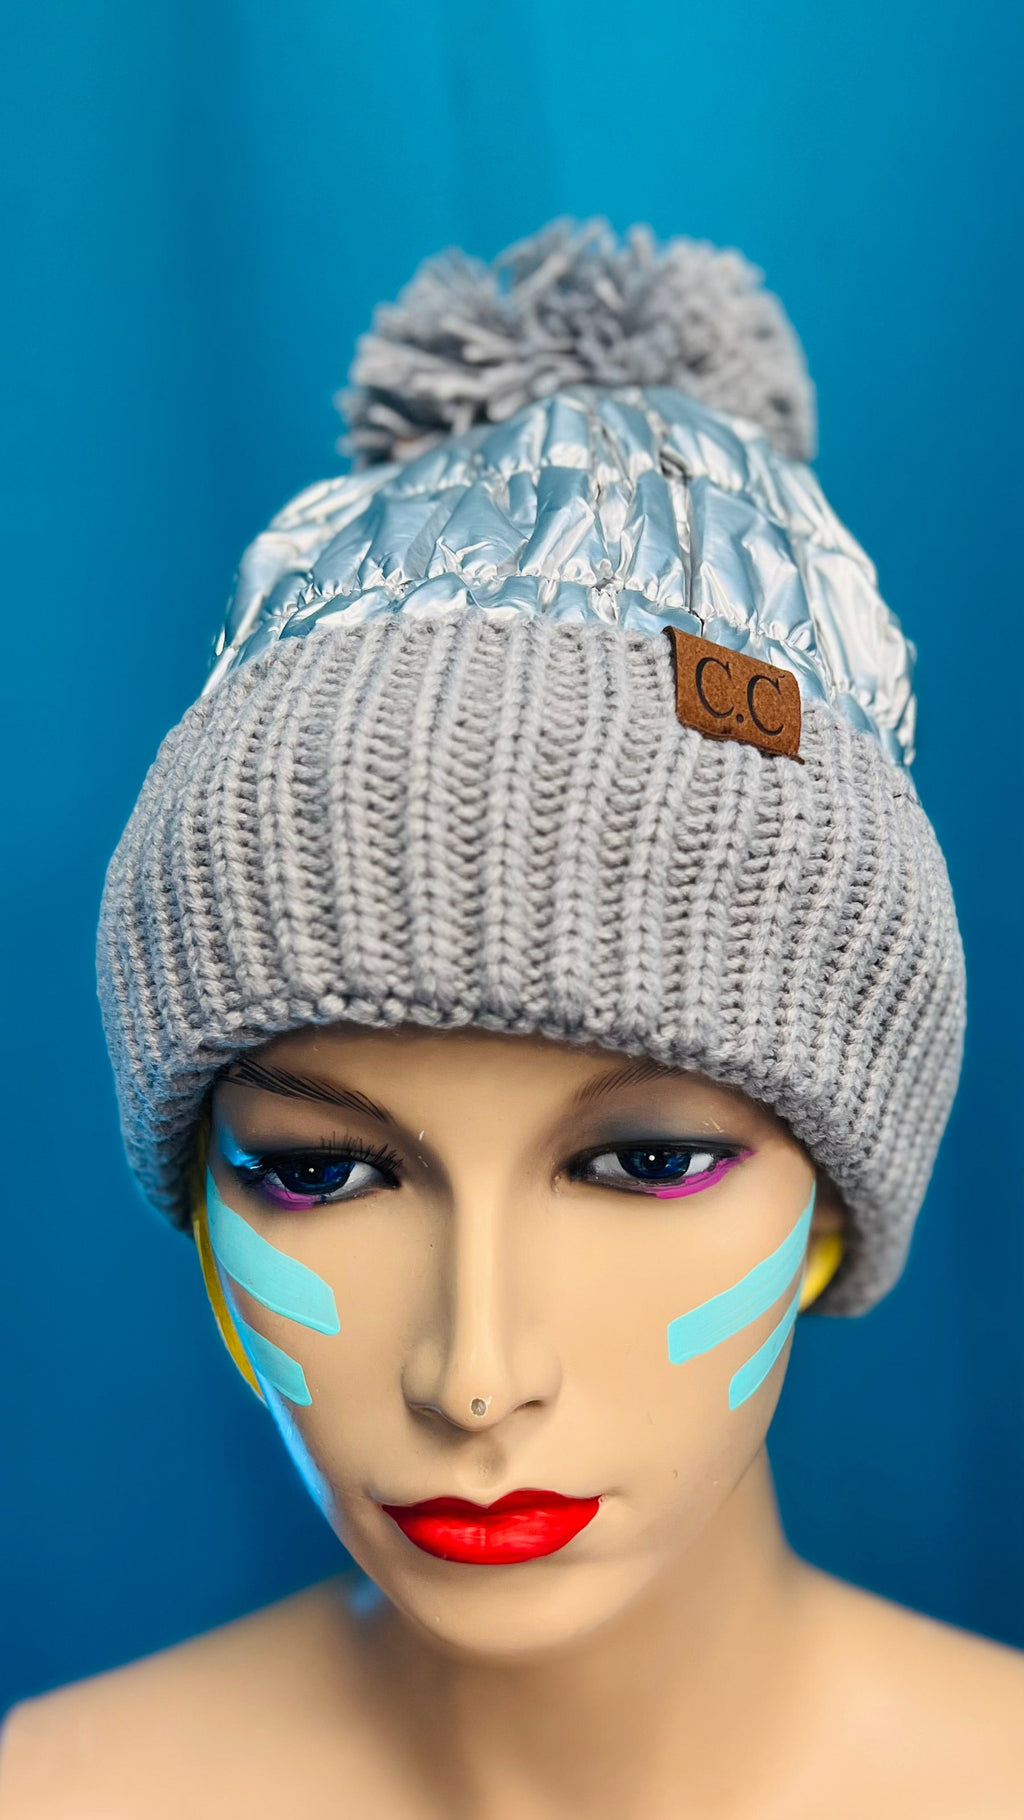 Stay stylish and warm this season with this unique, puffer silver foil C.C. Beanie. The intricate shiny material is truly flasy, and the plush pom pom on the top lends an exclusive, luxurious feel. Keep cozy but make a statement with this stylish beanie.  One size fits most.   Materials: Polyester, Acrylic